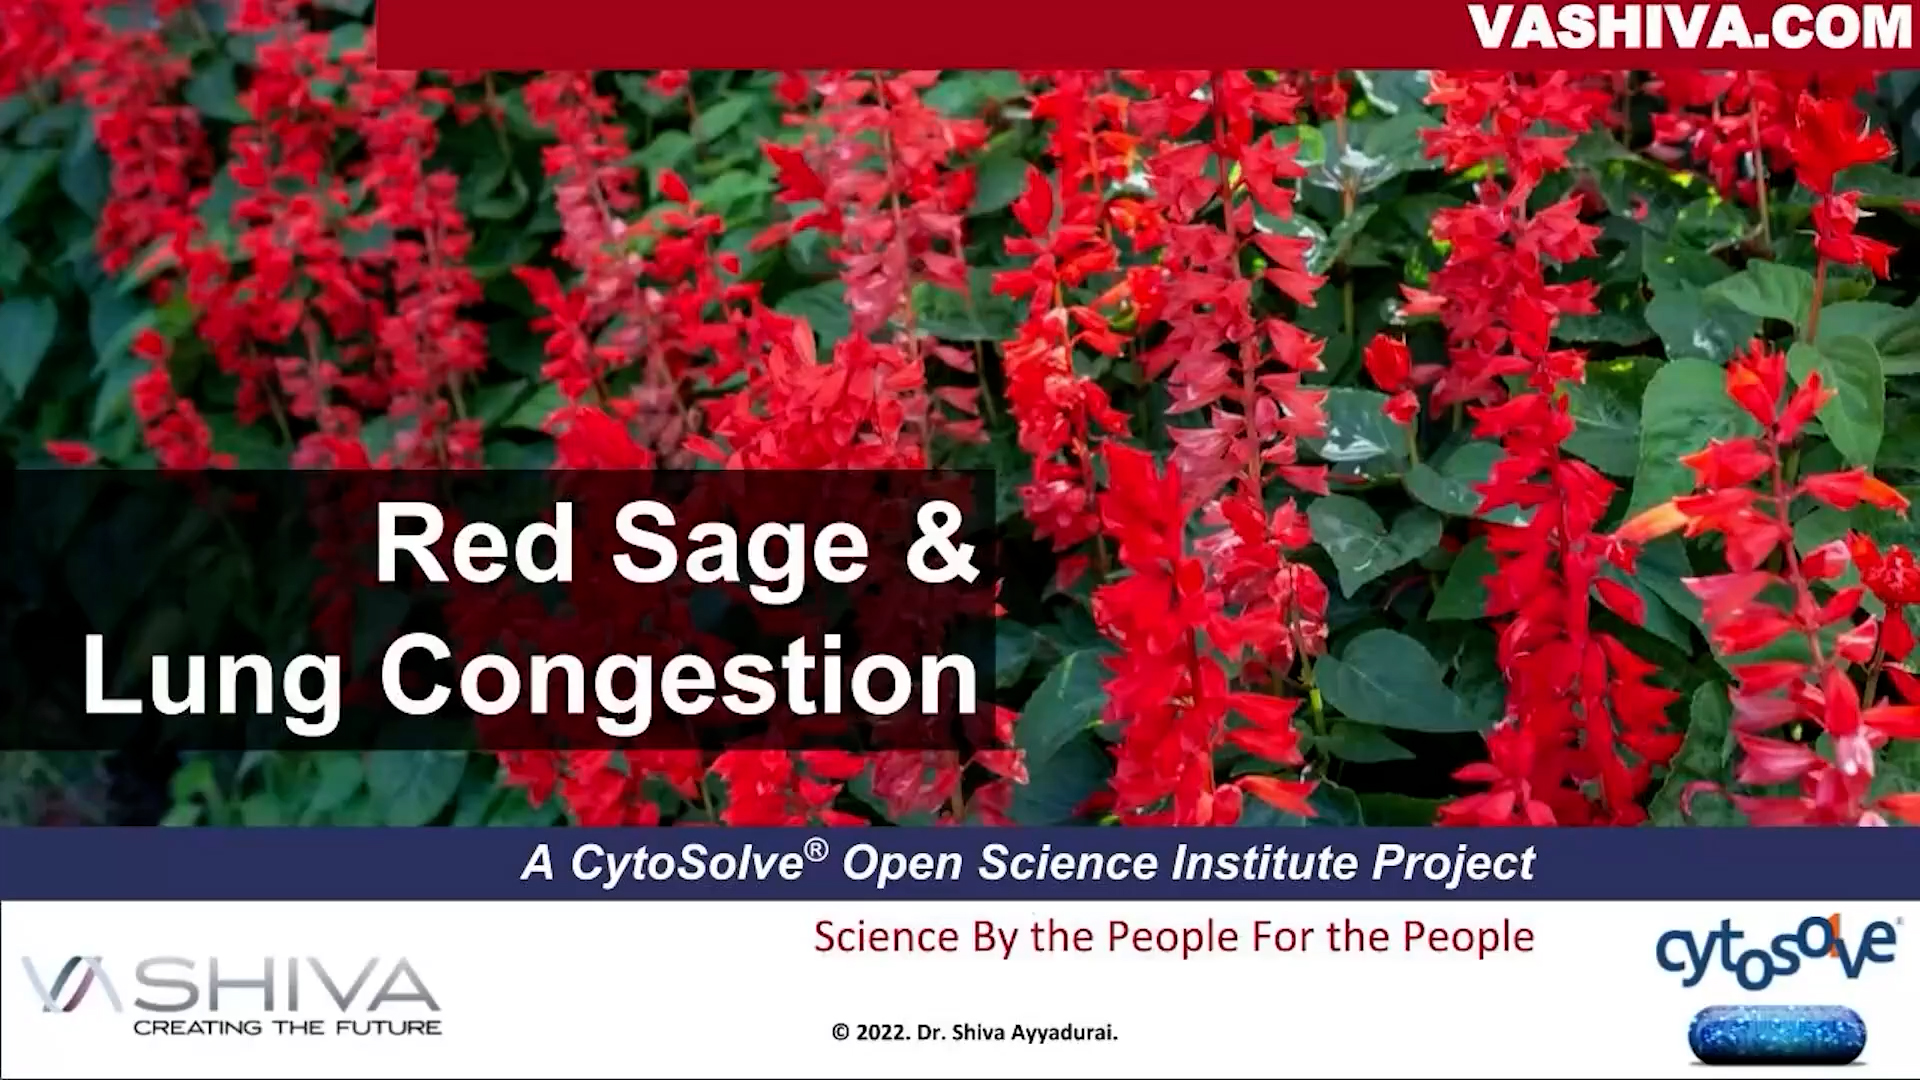 Dr.SHIVA: Red Sage & Lung Congestion